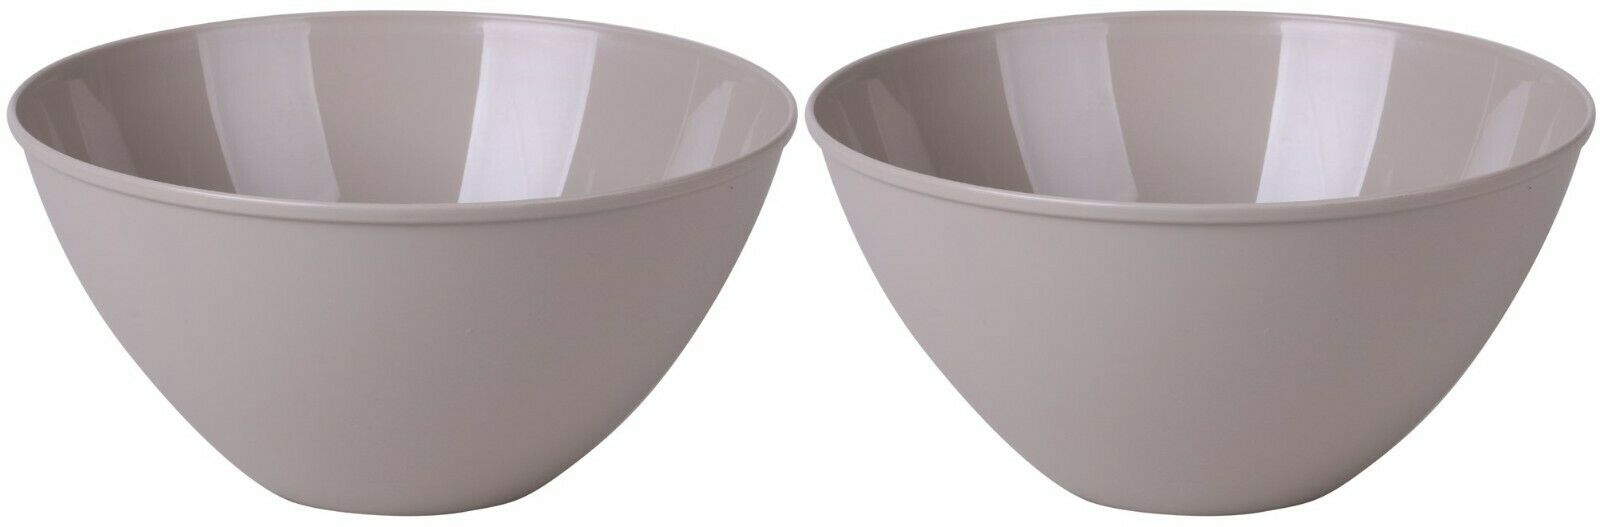 Set of 2 - 4.5 Litre Plastic Mixing Bowls Large Kitchen Salad Bowl in Taupe